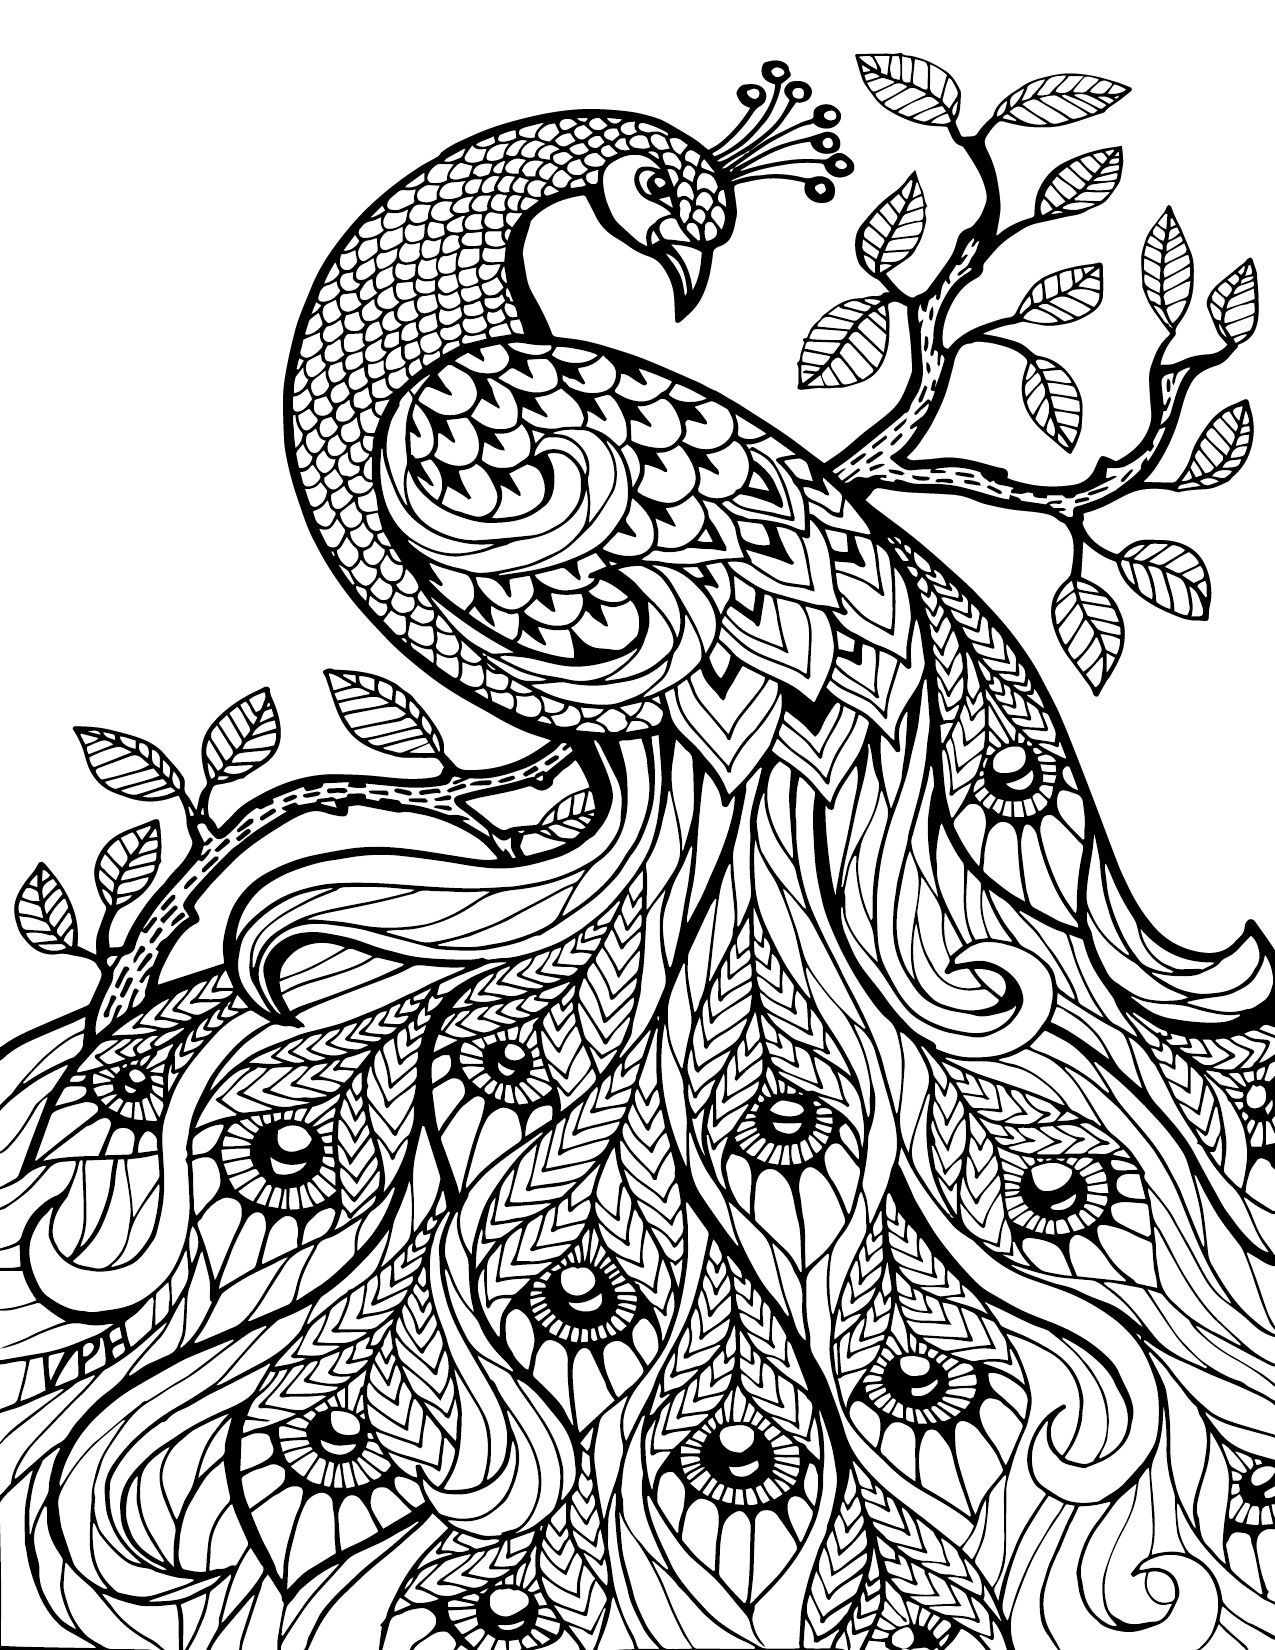 Free Printable Coloring Pages For Adults Only Image 36 Art - Free Printable Coloring Pages